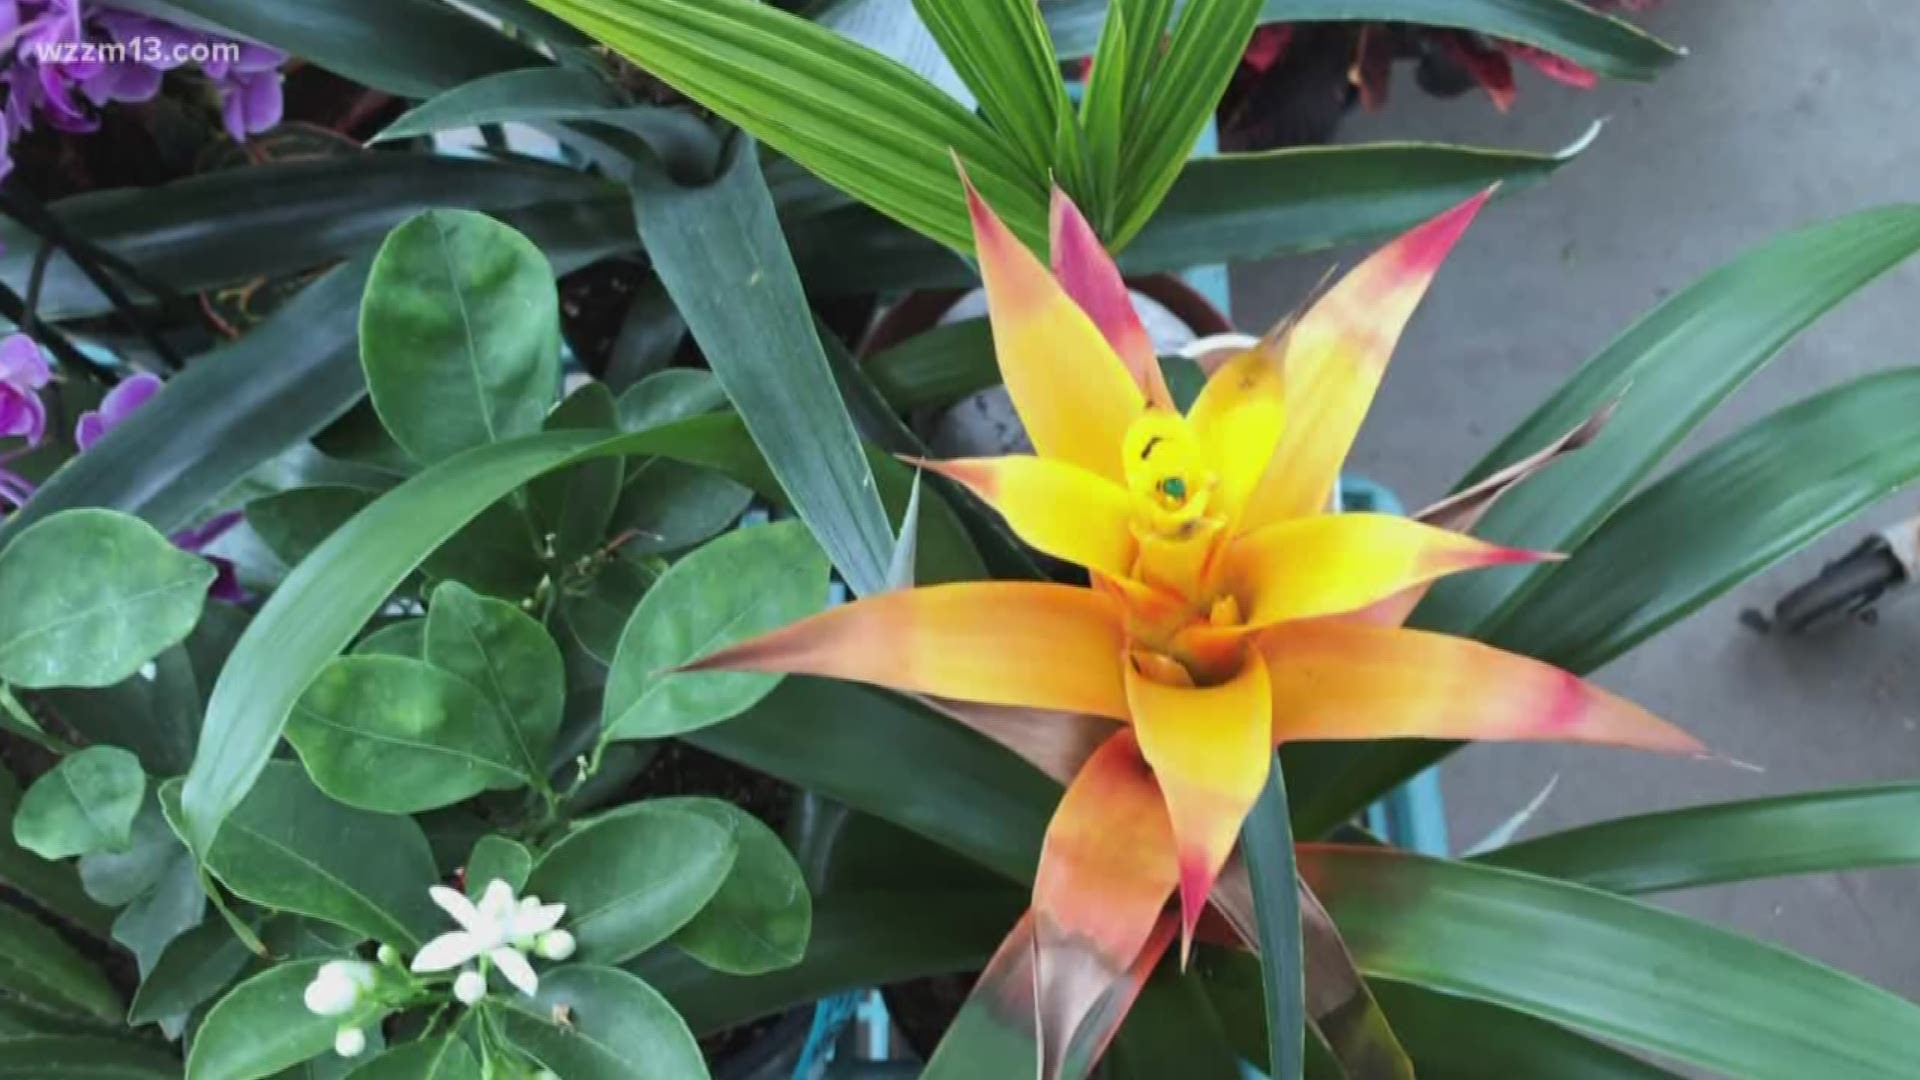 Indoor plants can bring a touch of the tropics during this cold, dreary winter.